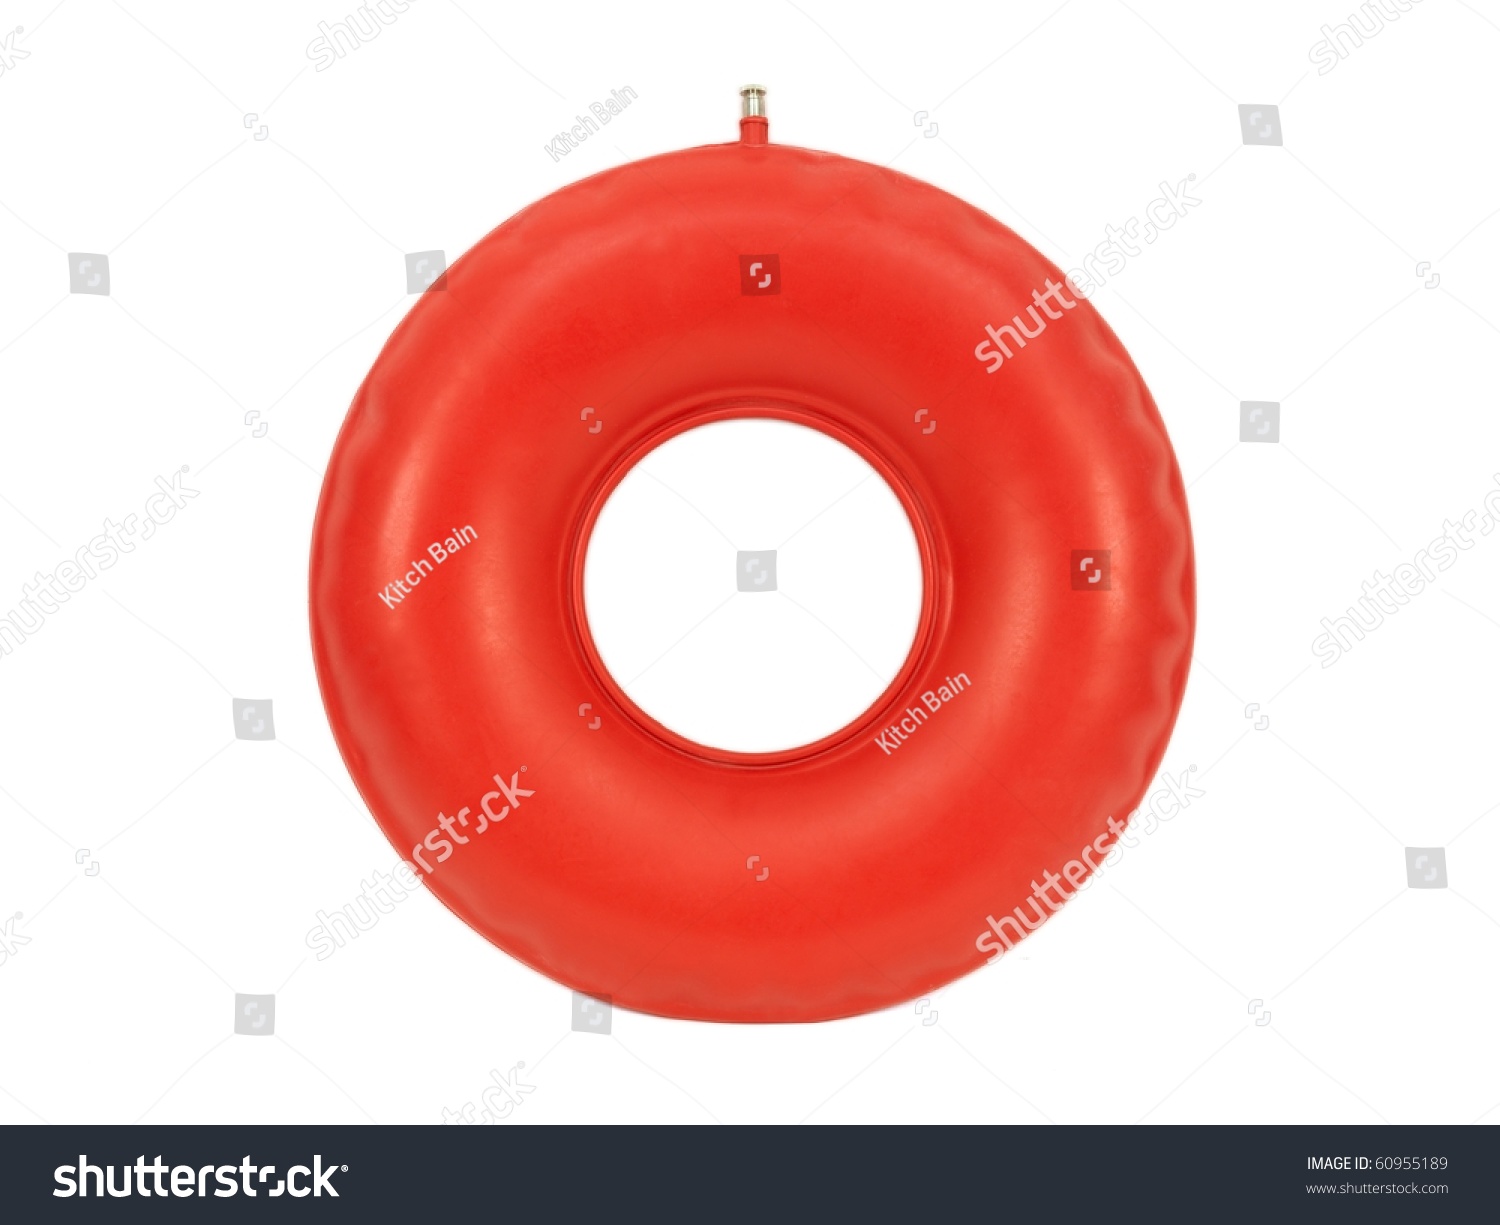 An inflatable air cushion isolated against a white background